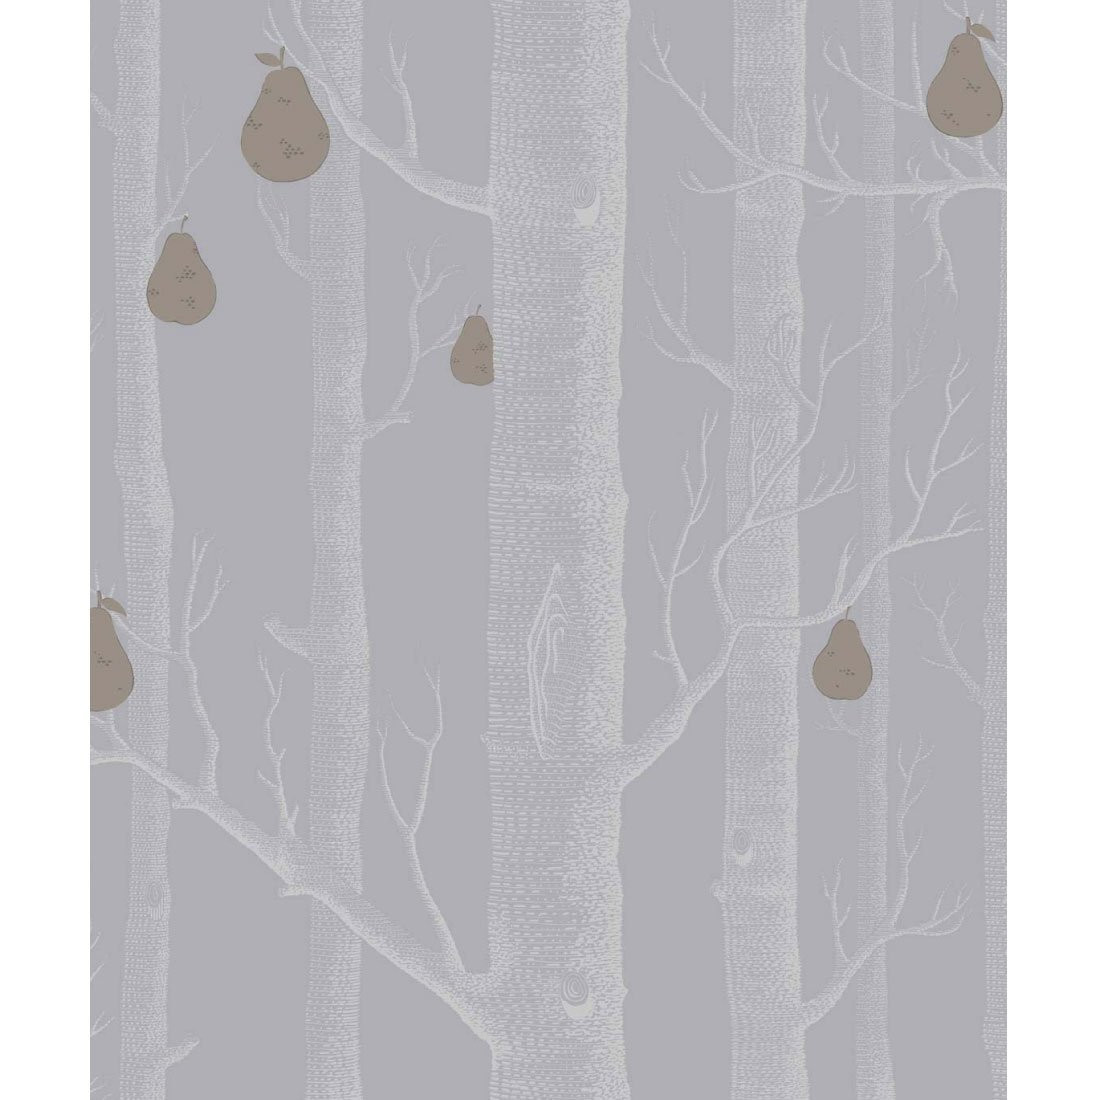 Cole & Son Woods Pears Behang - 955030